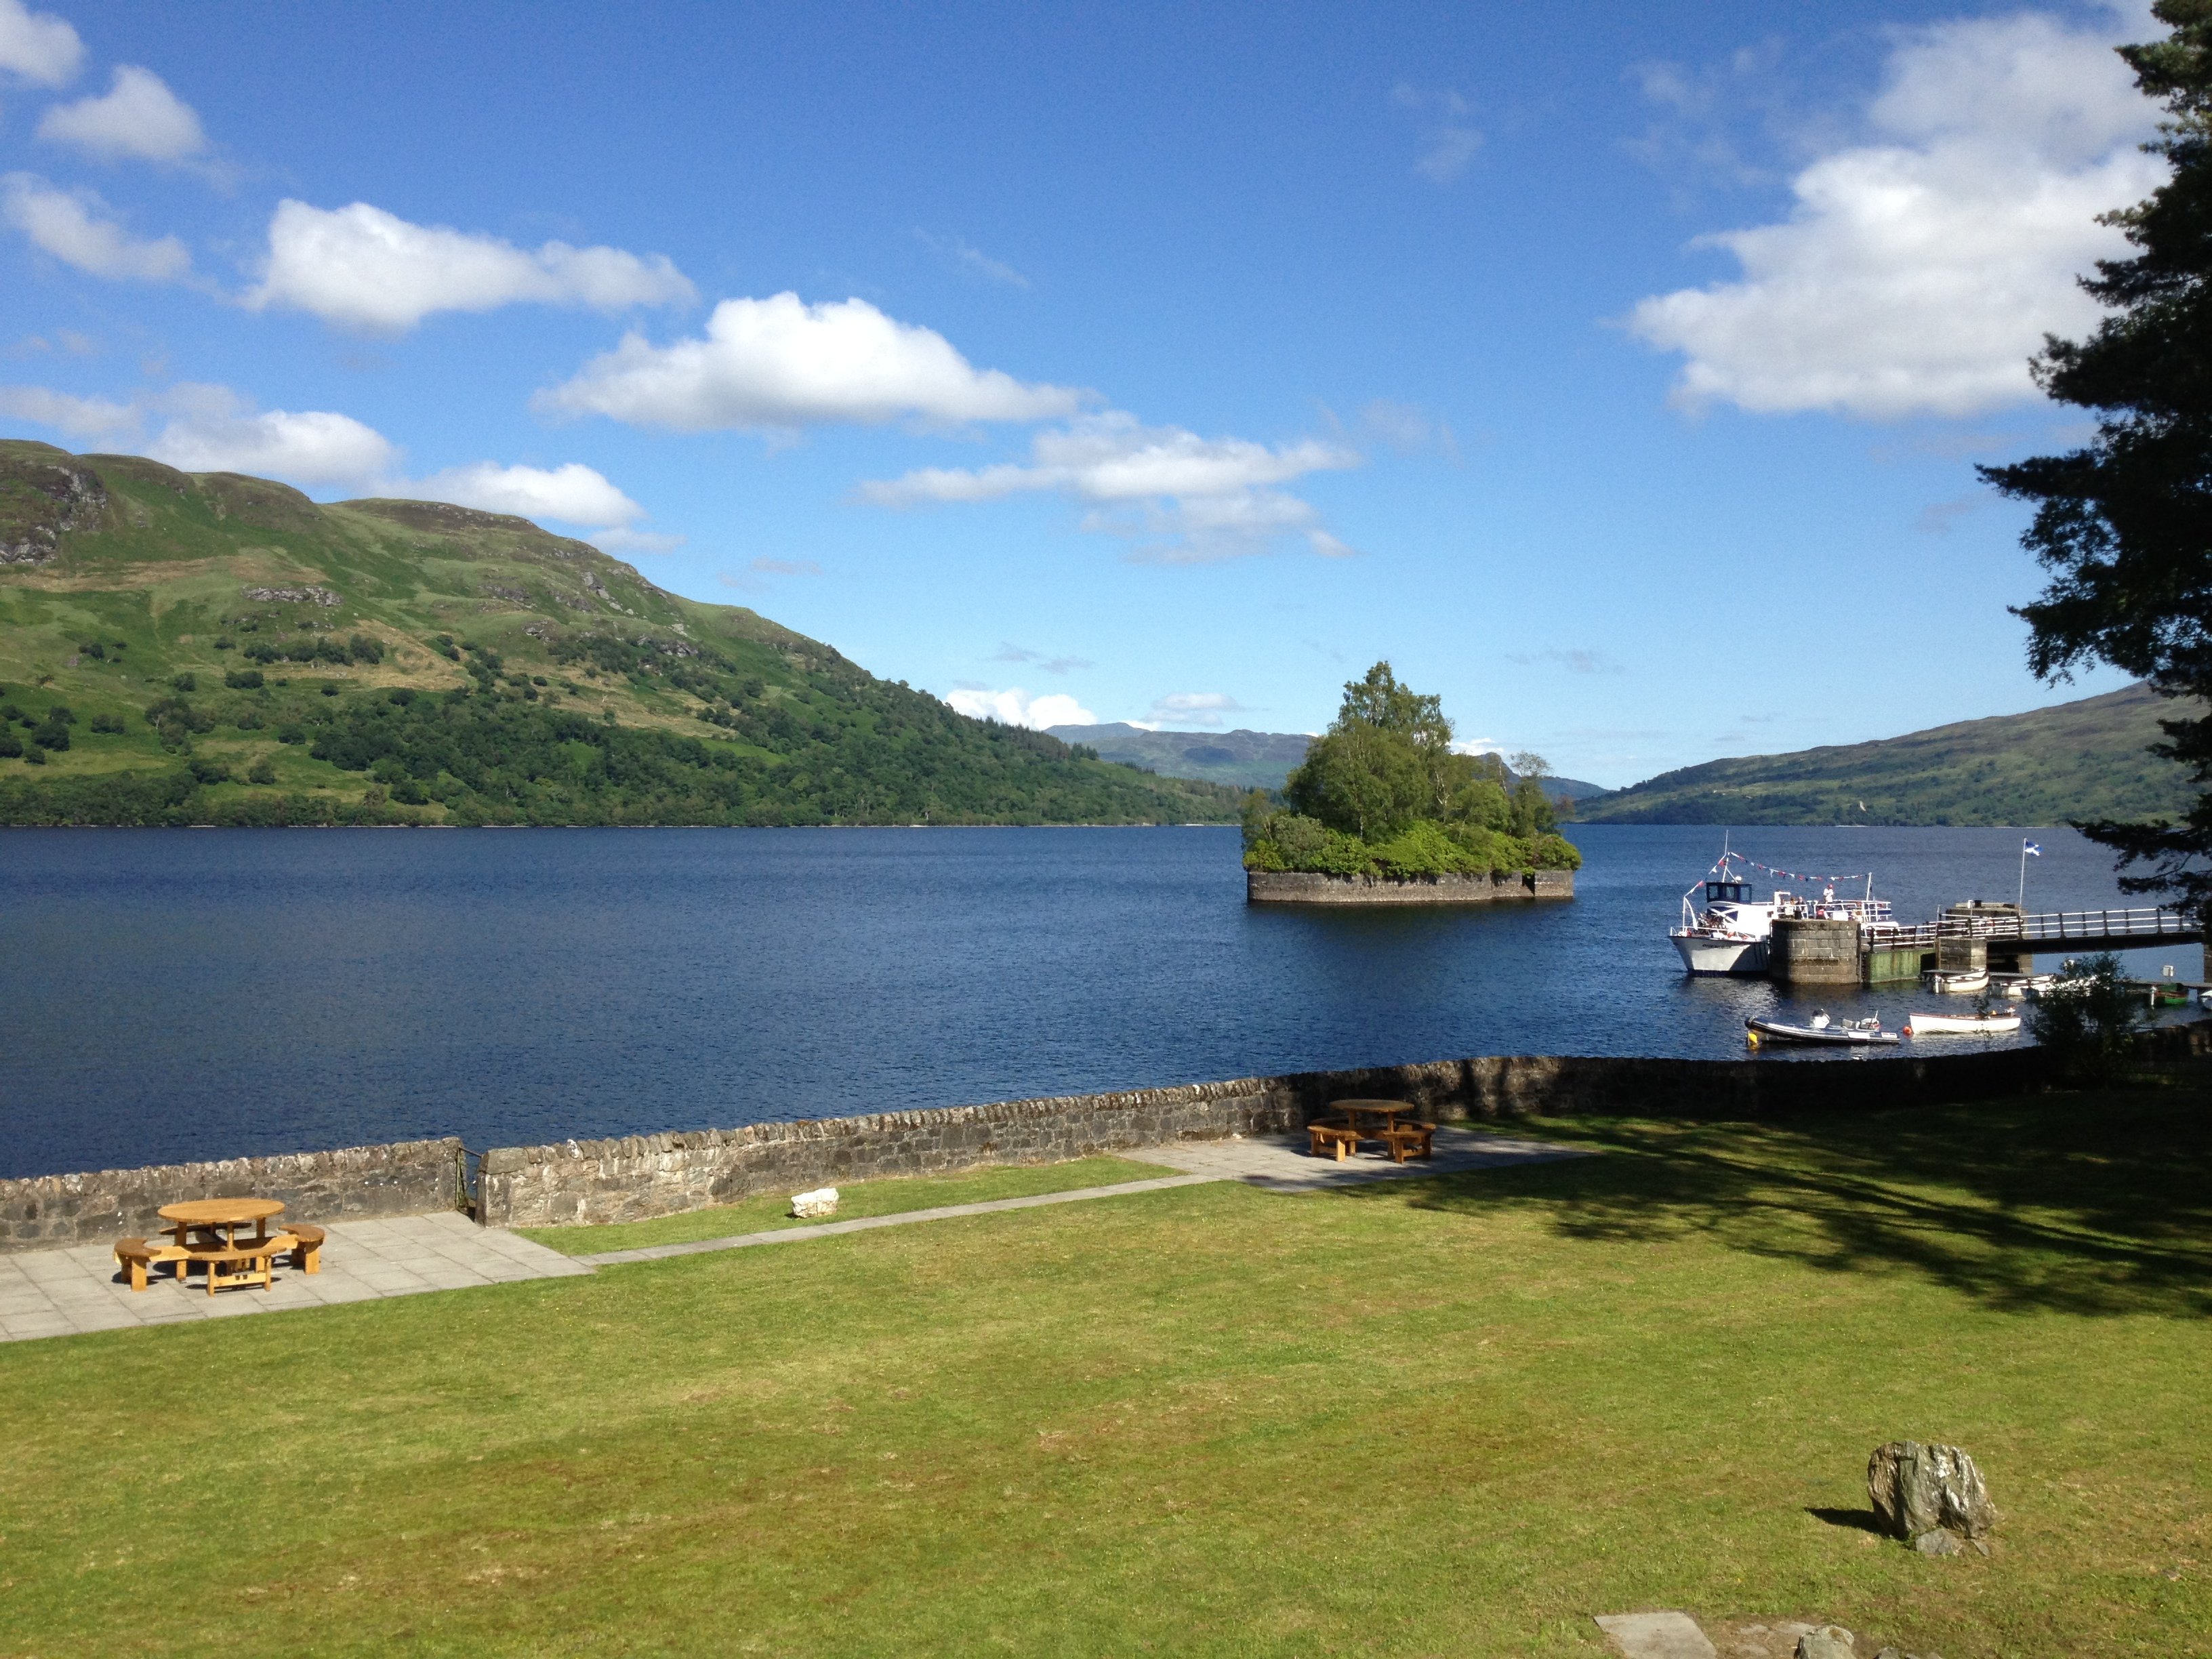 Stronachlachar Lodge - stunning views over the loch from the garden